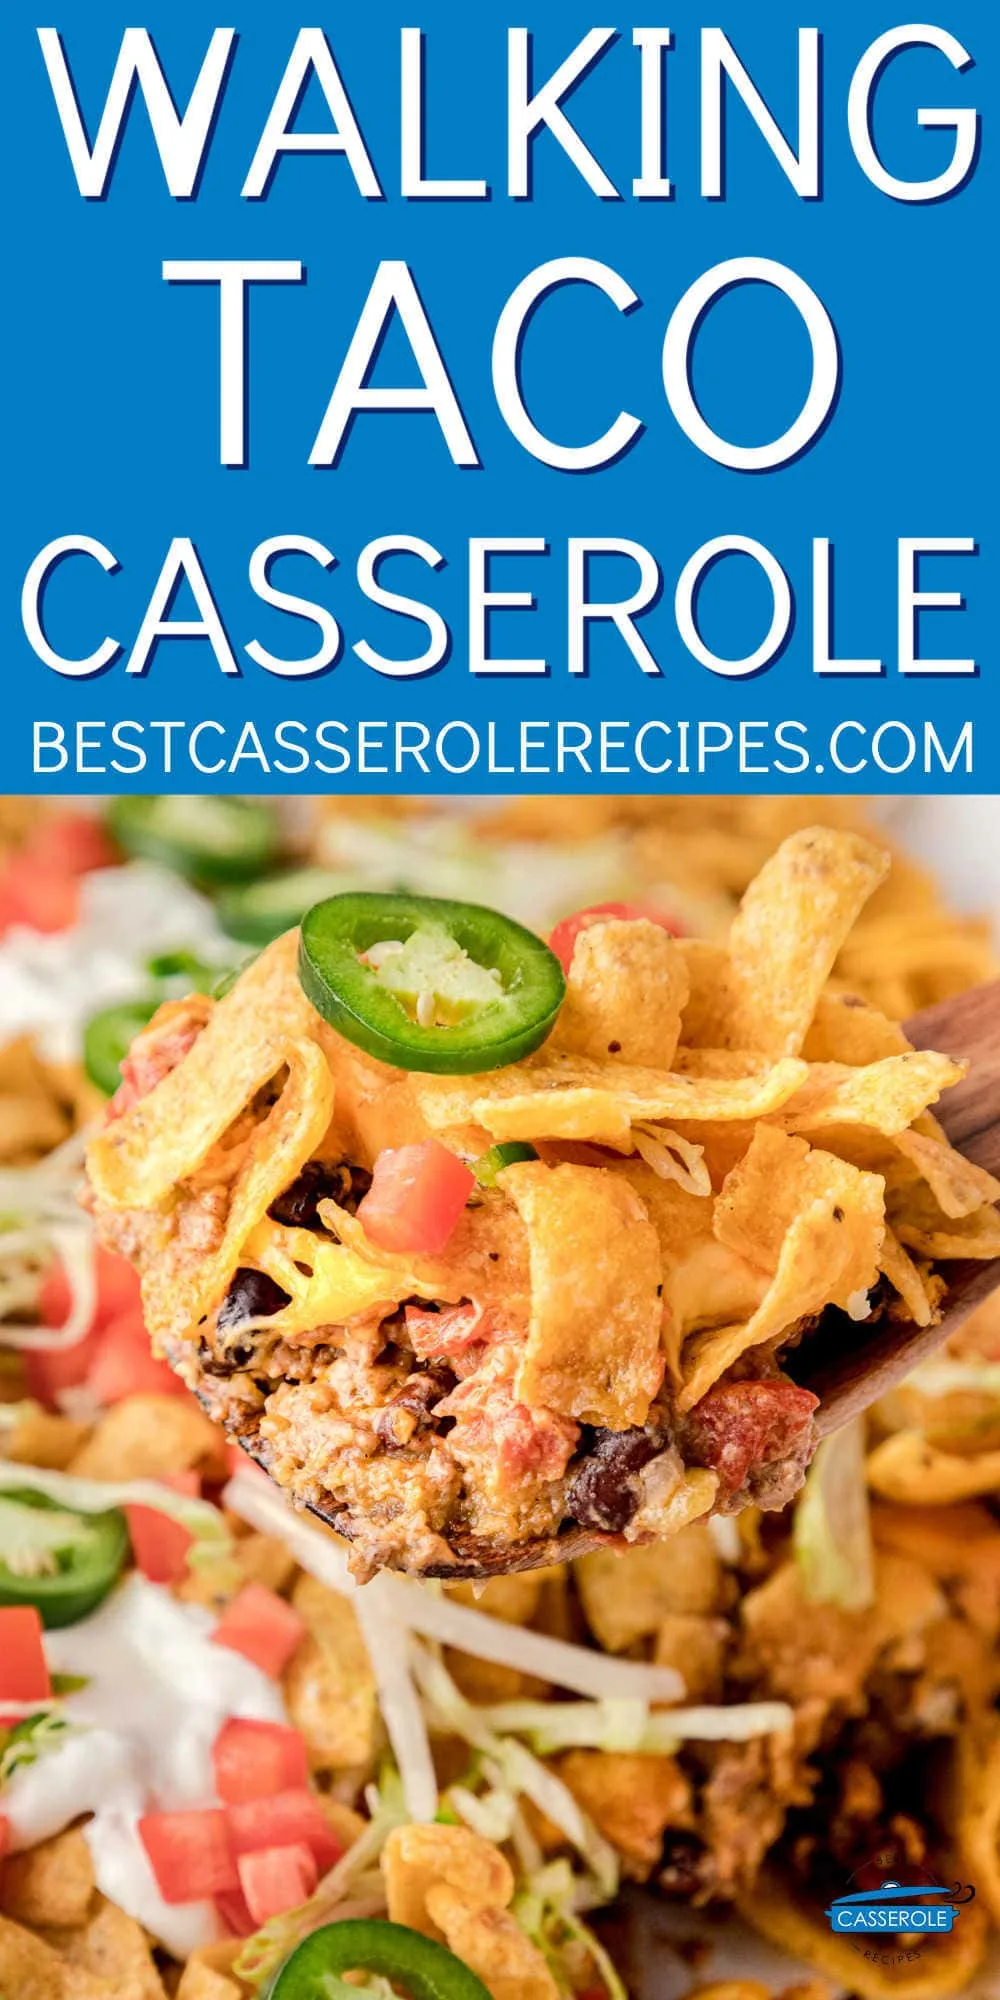 scoop of taco casserole with text "walking taco"